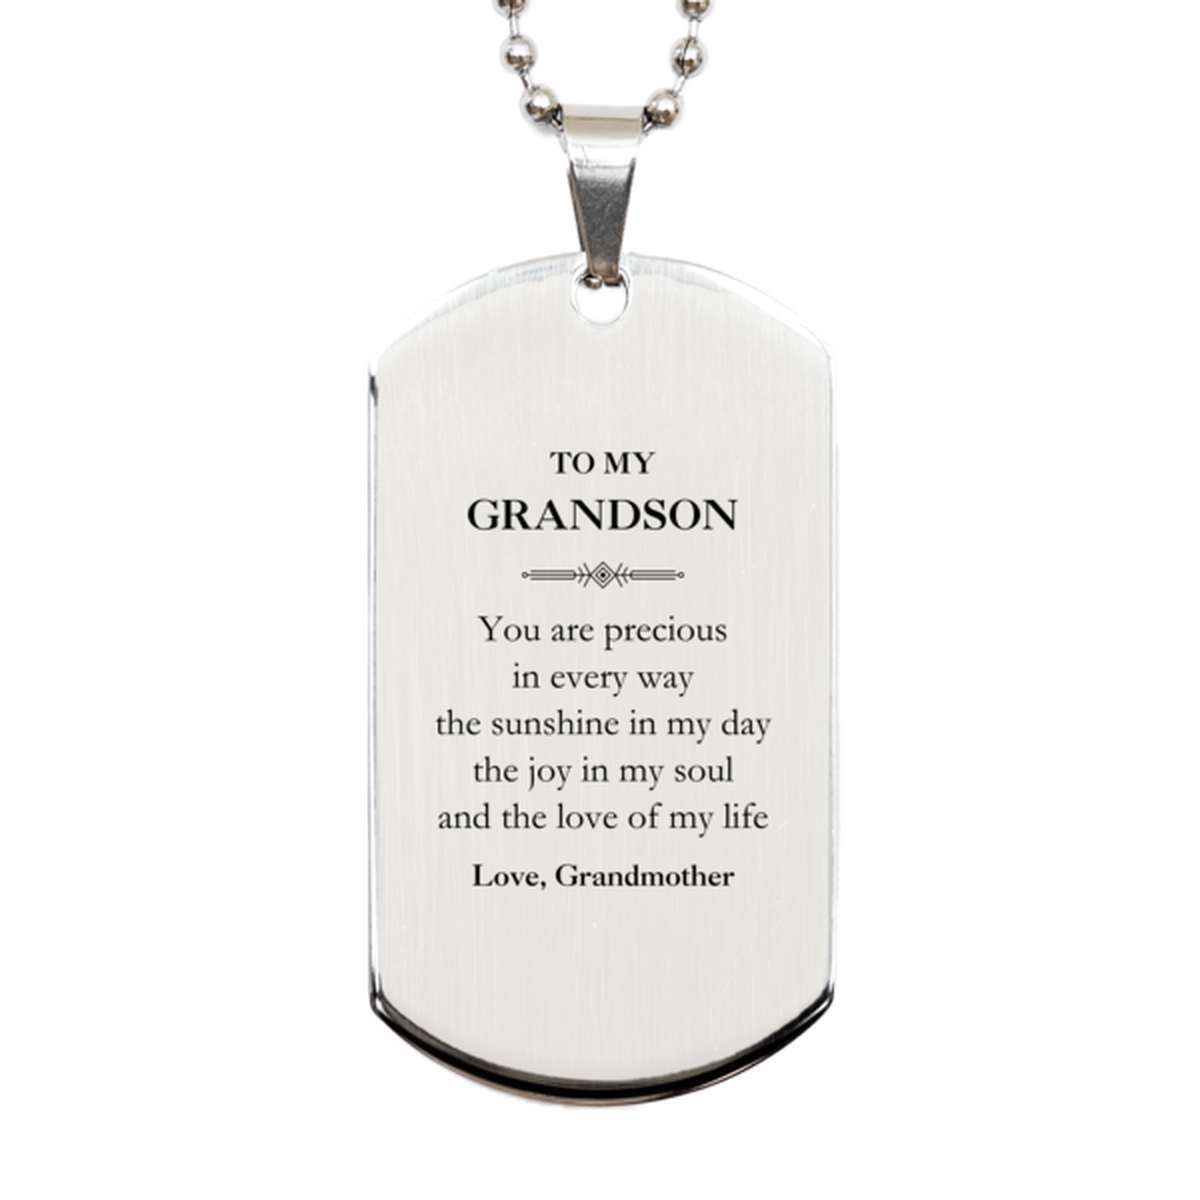 Graduation Gifts for Grandson Silver Dog Tag Present from Grandmother, Christmas Grandson Birthday Gifts Grandson You are precious in every way the sunshine in my day. Love, Grandmother